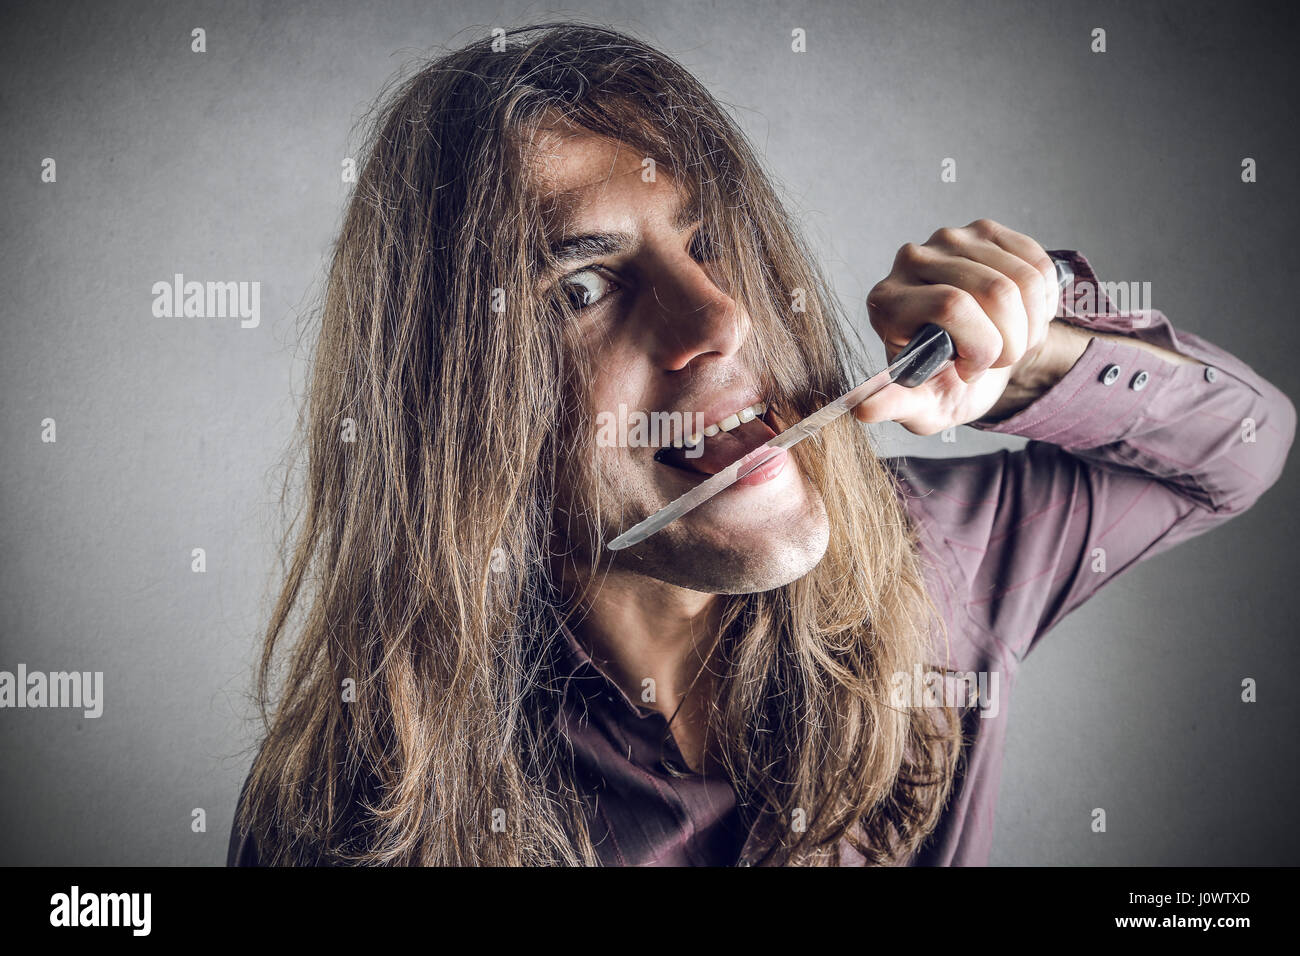 Crazy man with knife Stock Photo